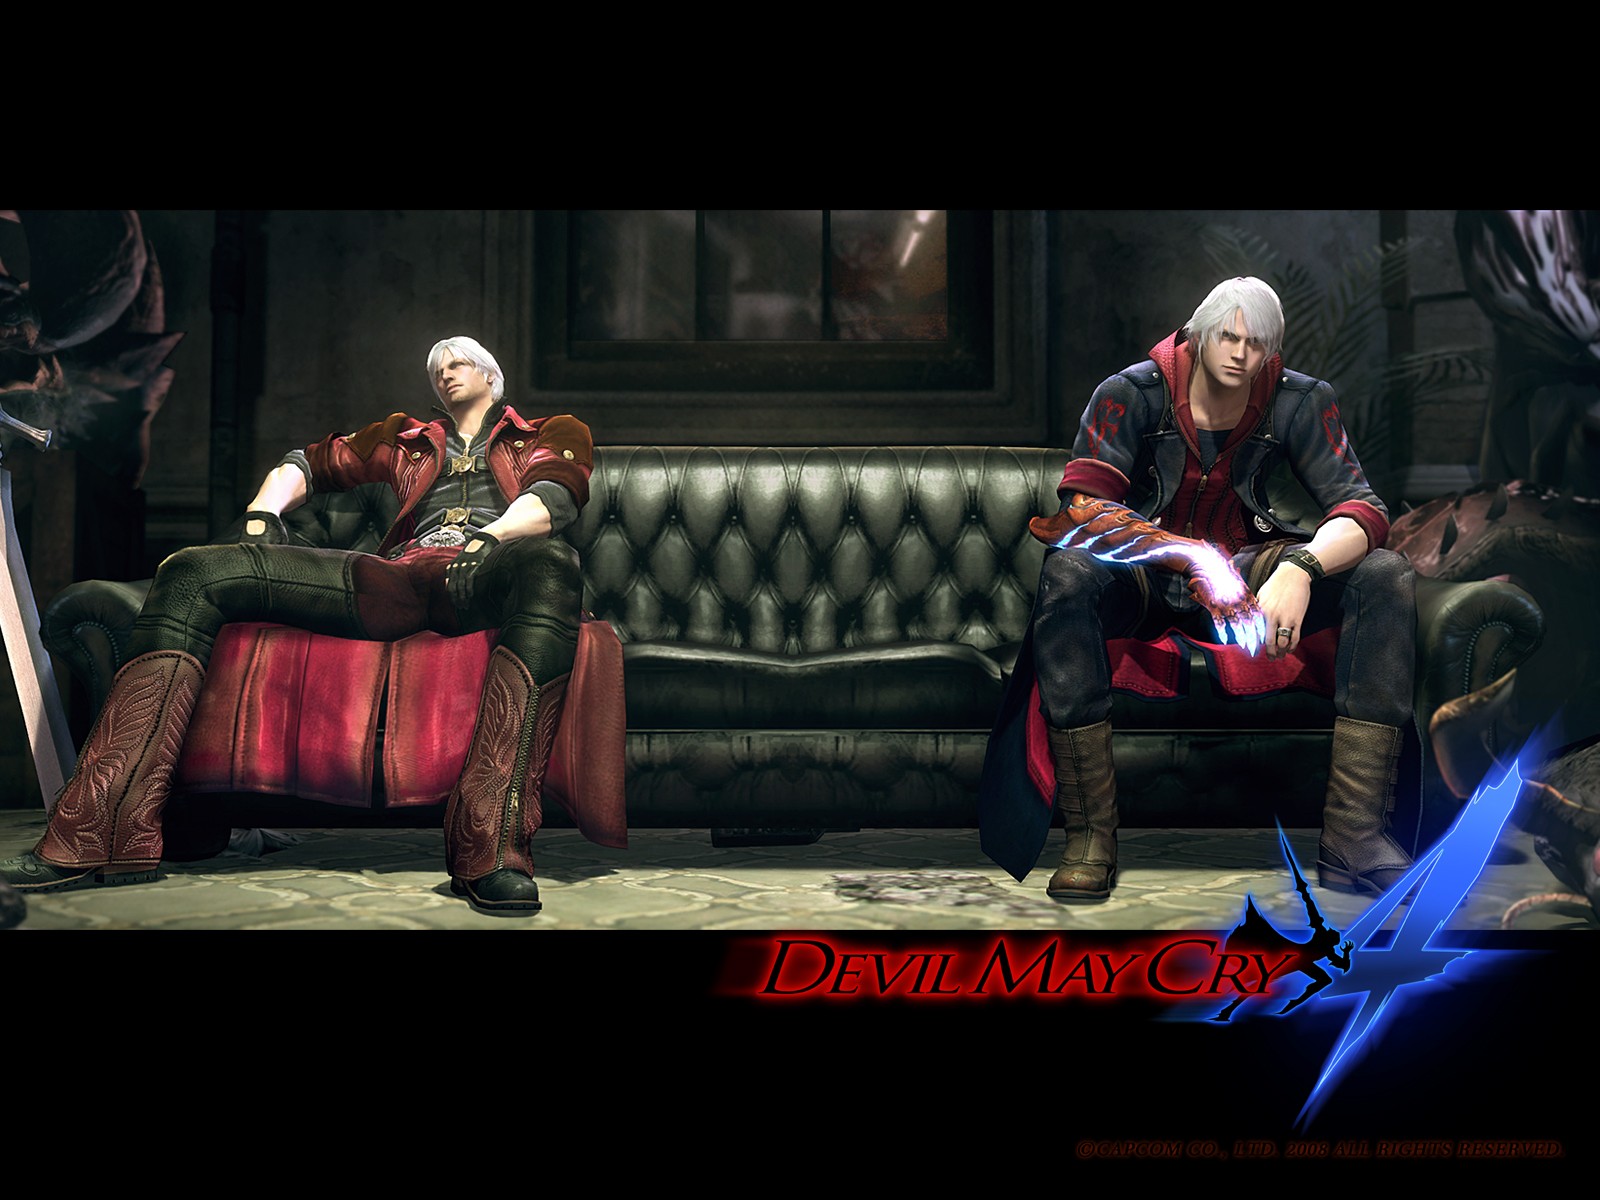 Devil May Cry 4 Backgrounds